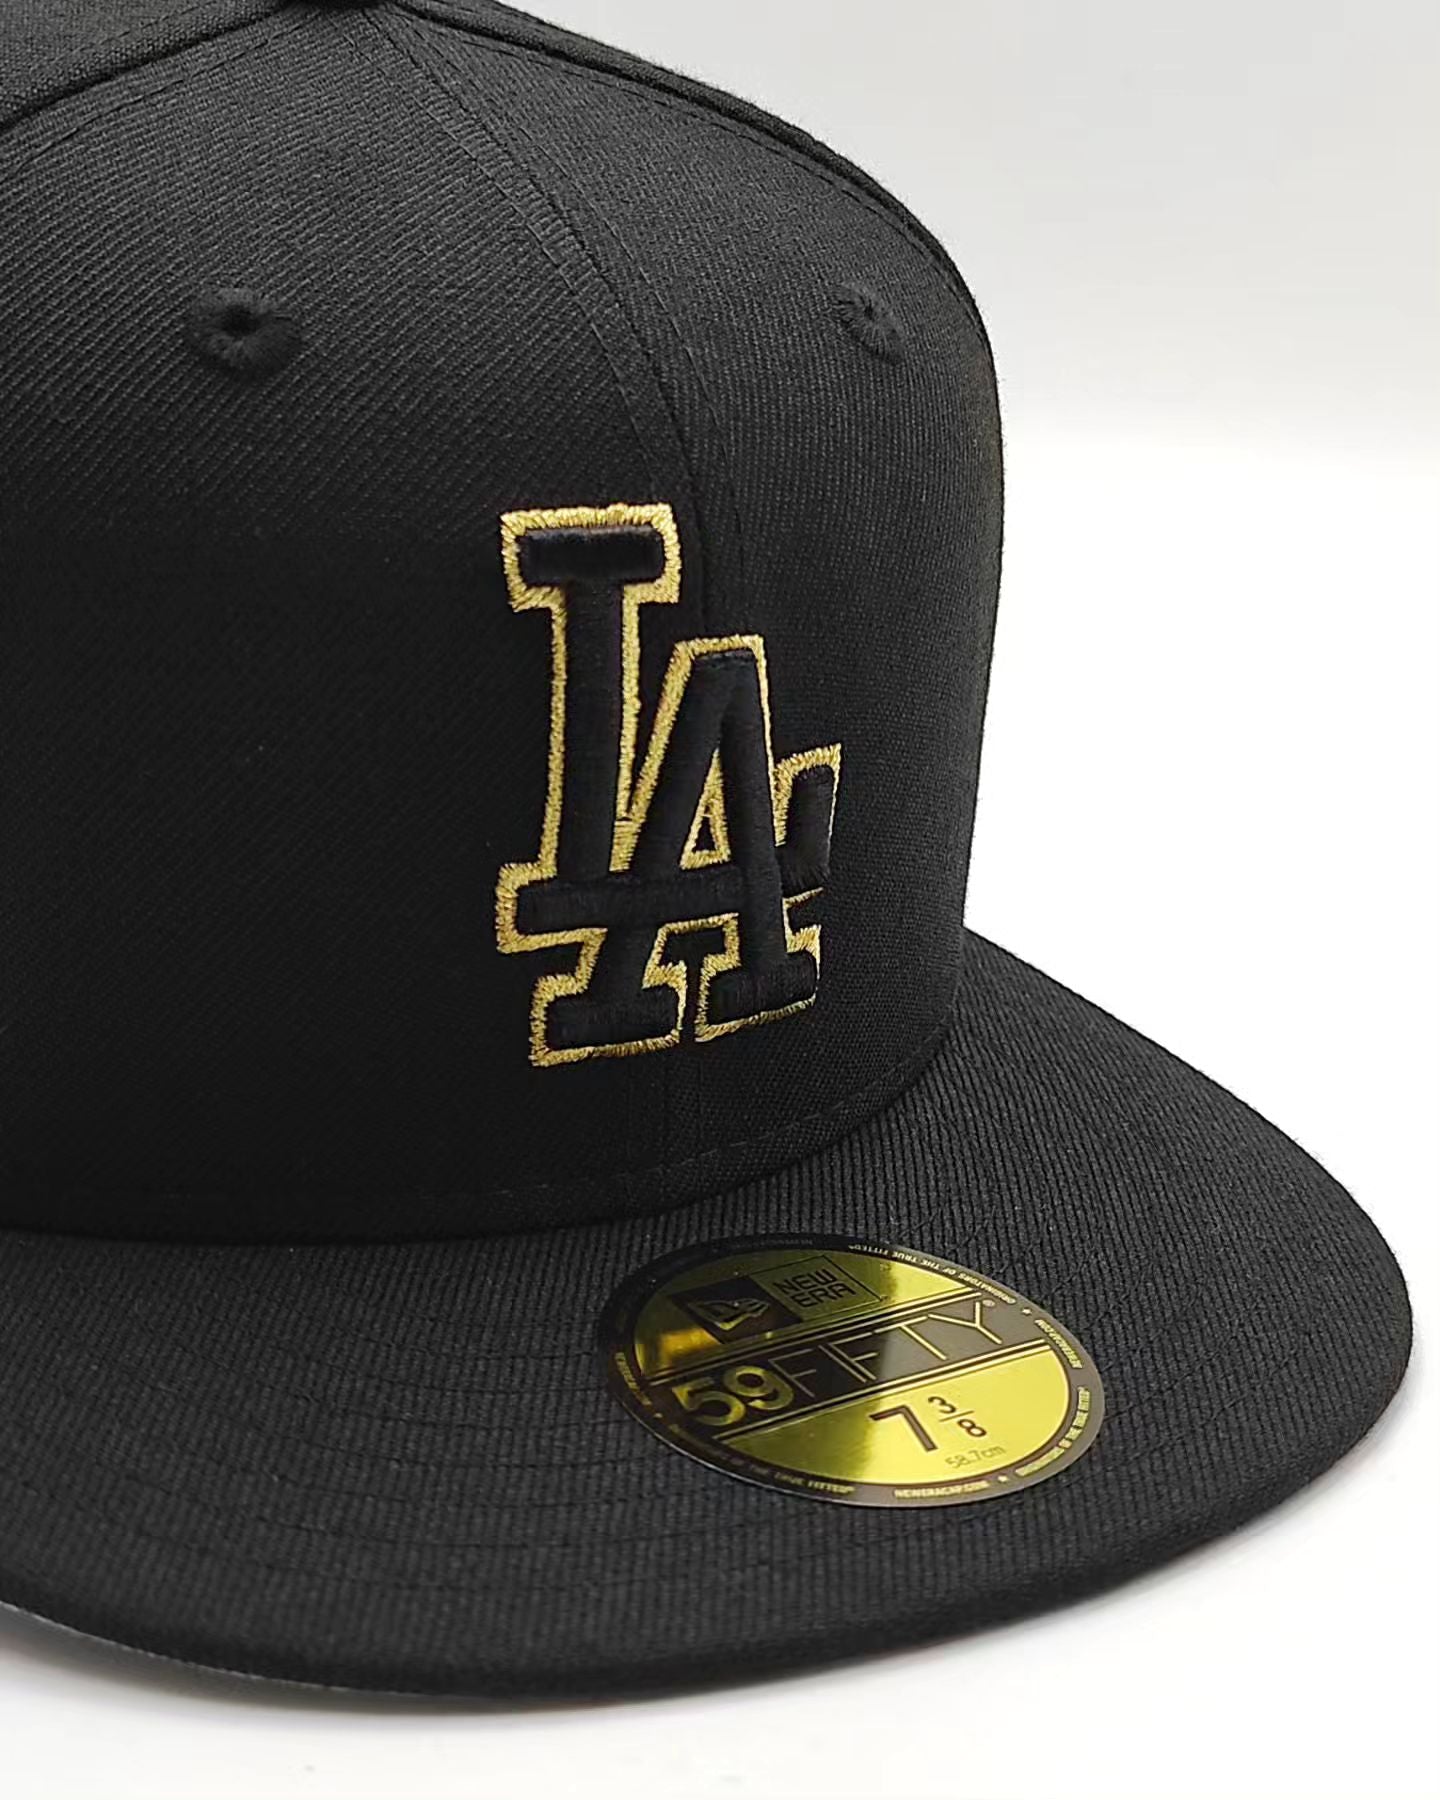 New Era Los Angeles Dodgers 59Fifty metalicc accent